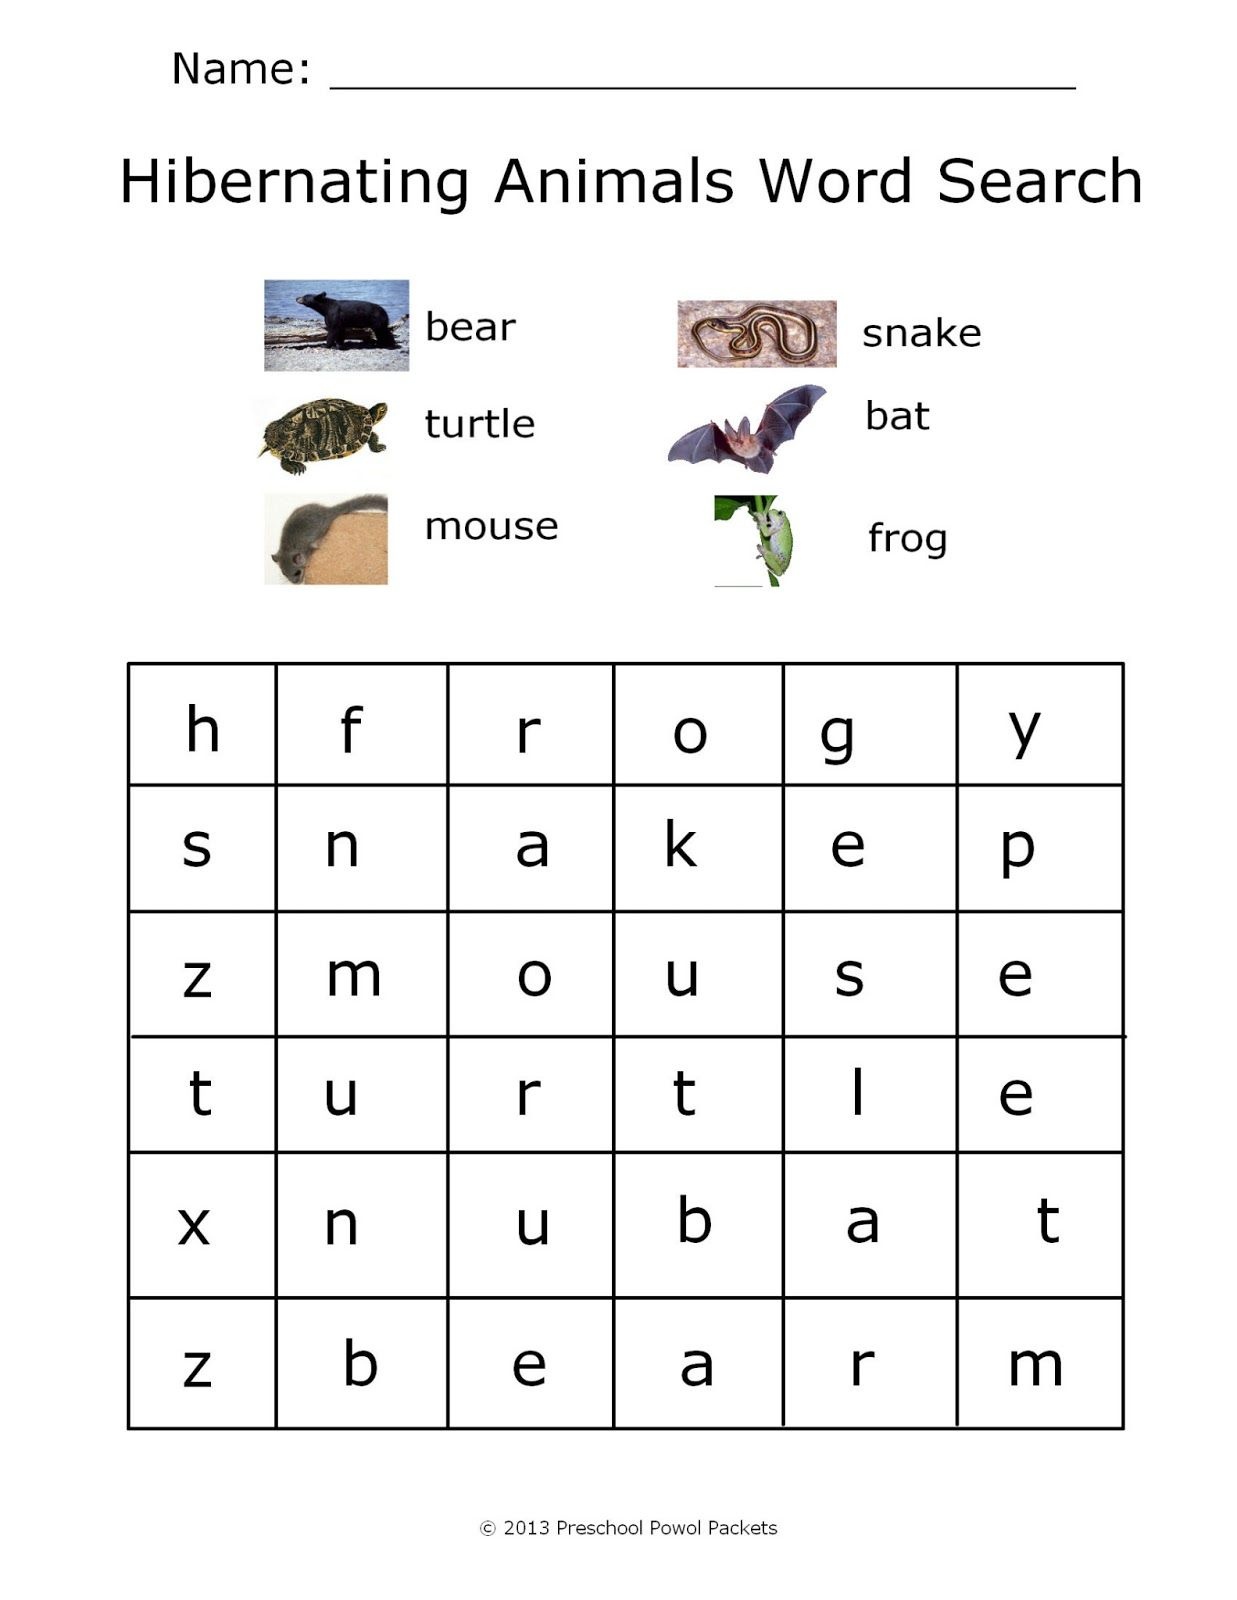 Fill in the words animal senior. Word search animals. Animal Wordsearch. Animals Wordsearch for Kindergarten. Animals Wordsearch for Kids.